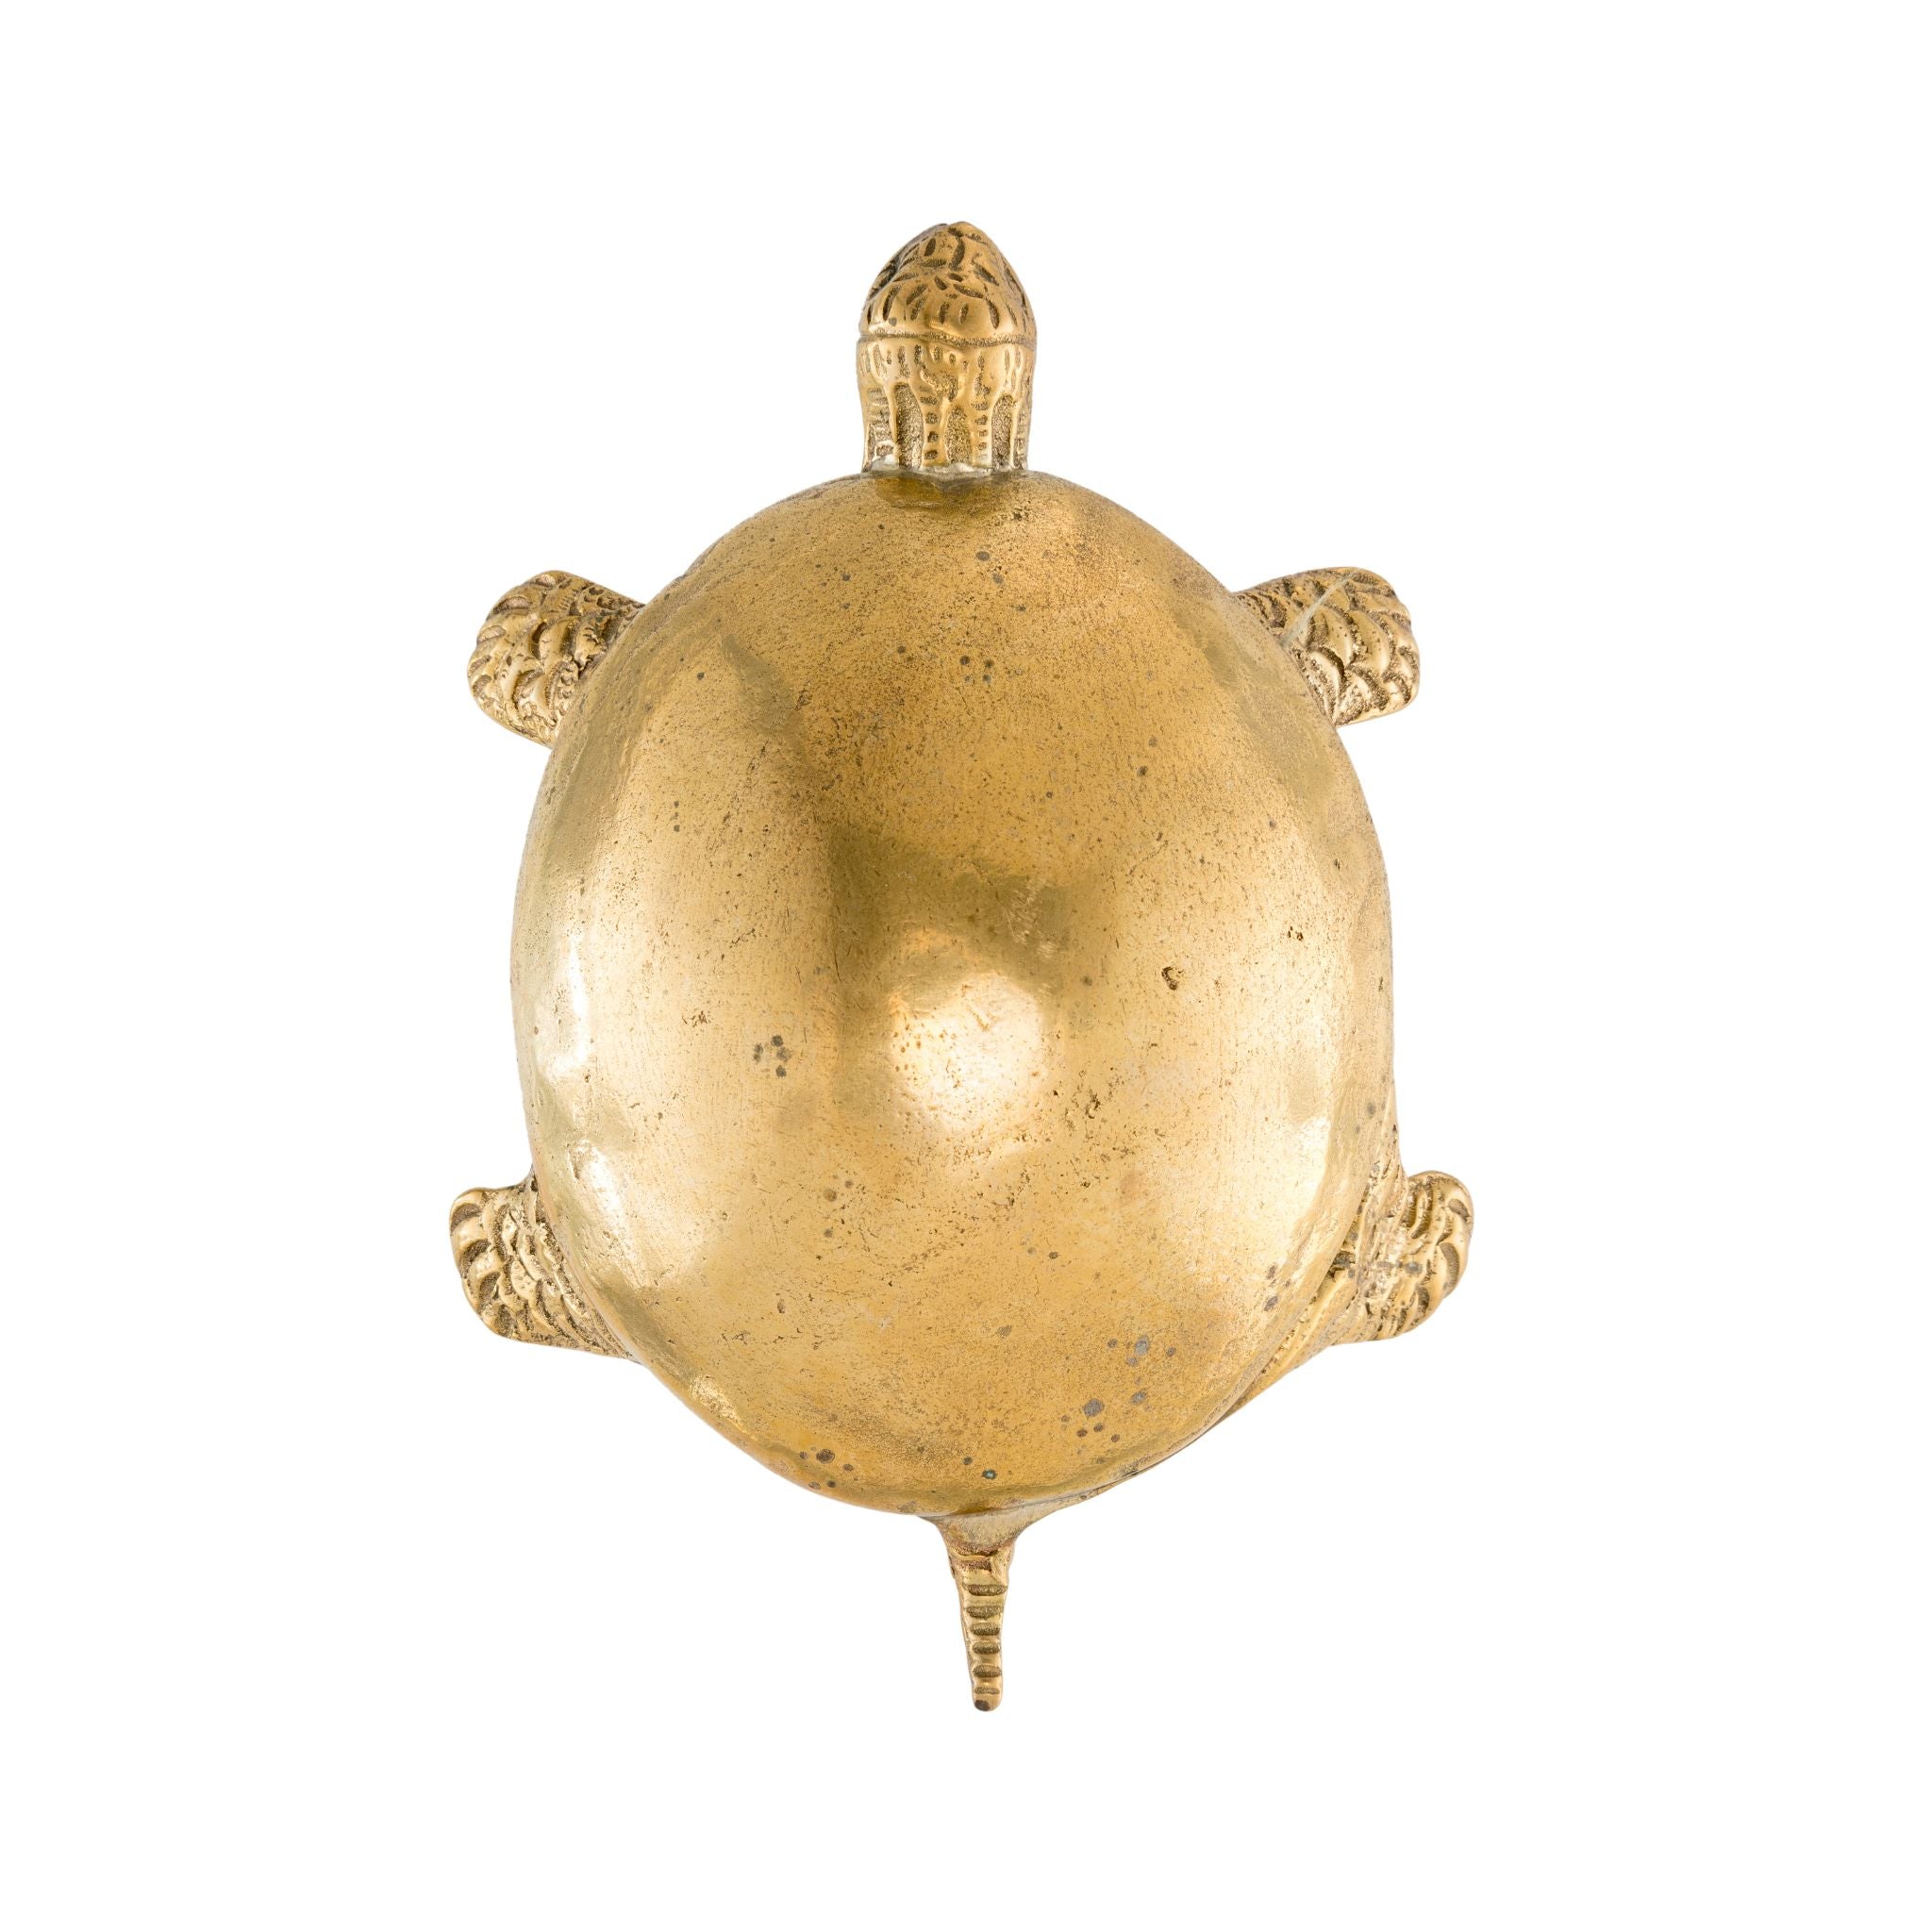 An image of a smooth brass turtle-shaped knob against a neutral background. The knob boasts a sleek design reminiscent of a turtle's shell, adding a touch of understated elegance to furniture or drawers.